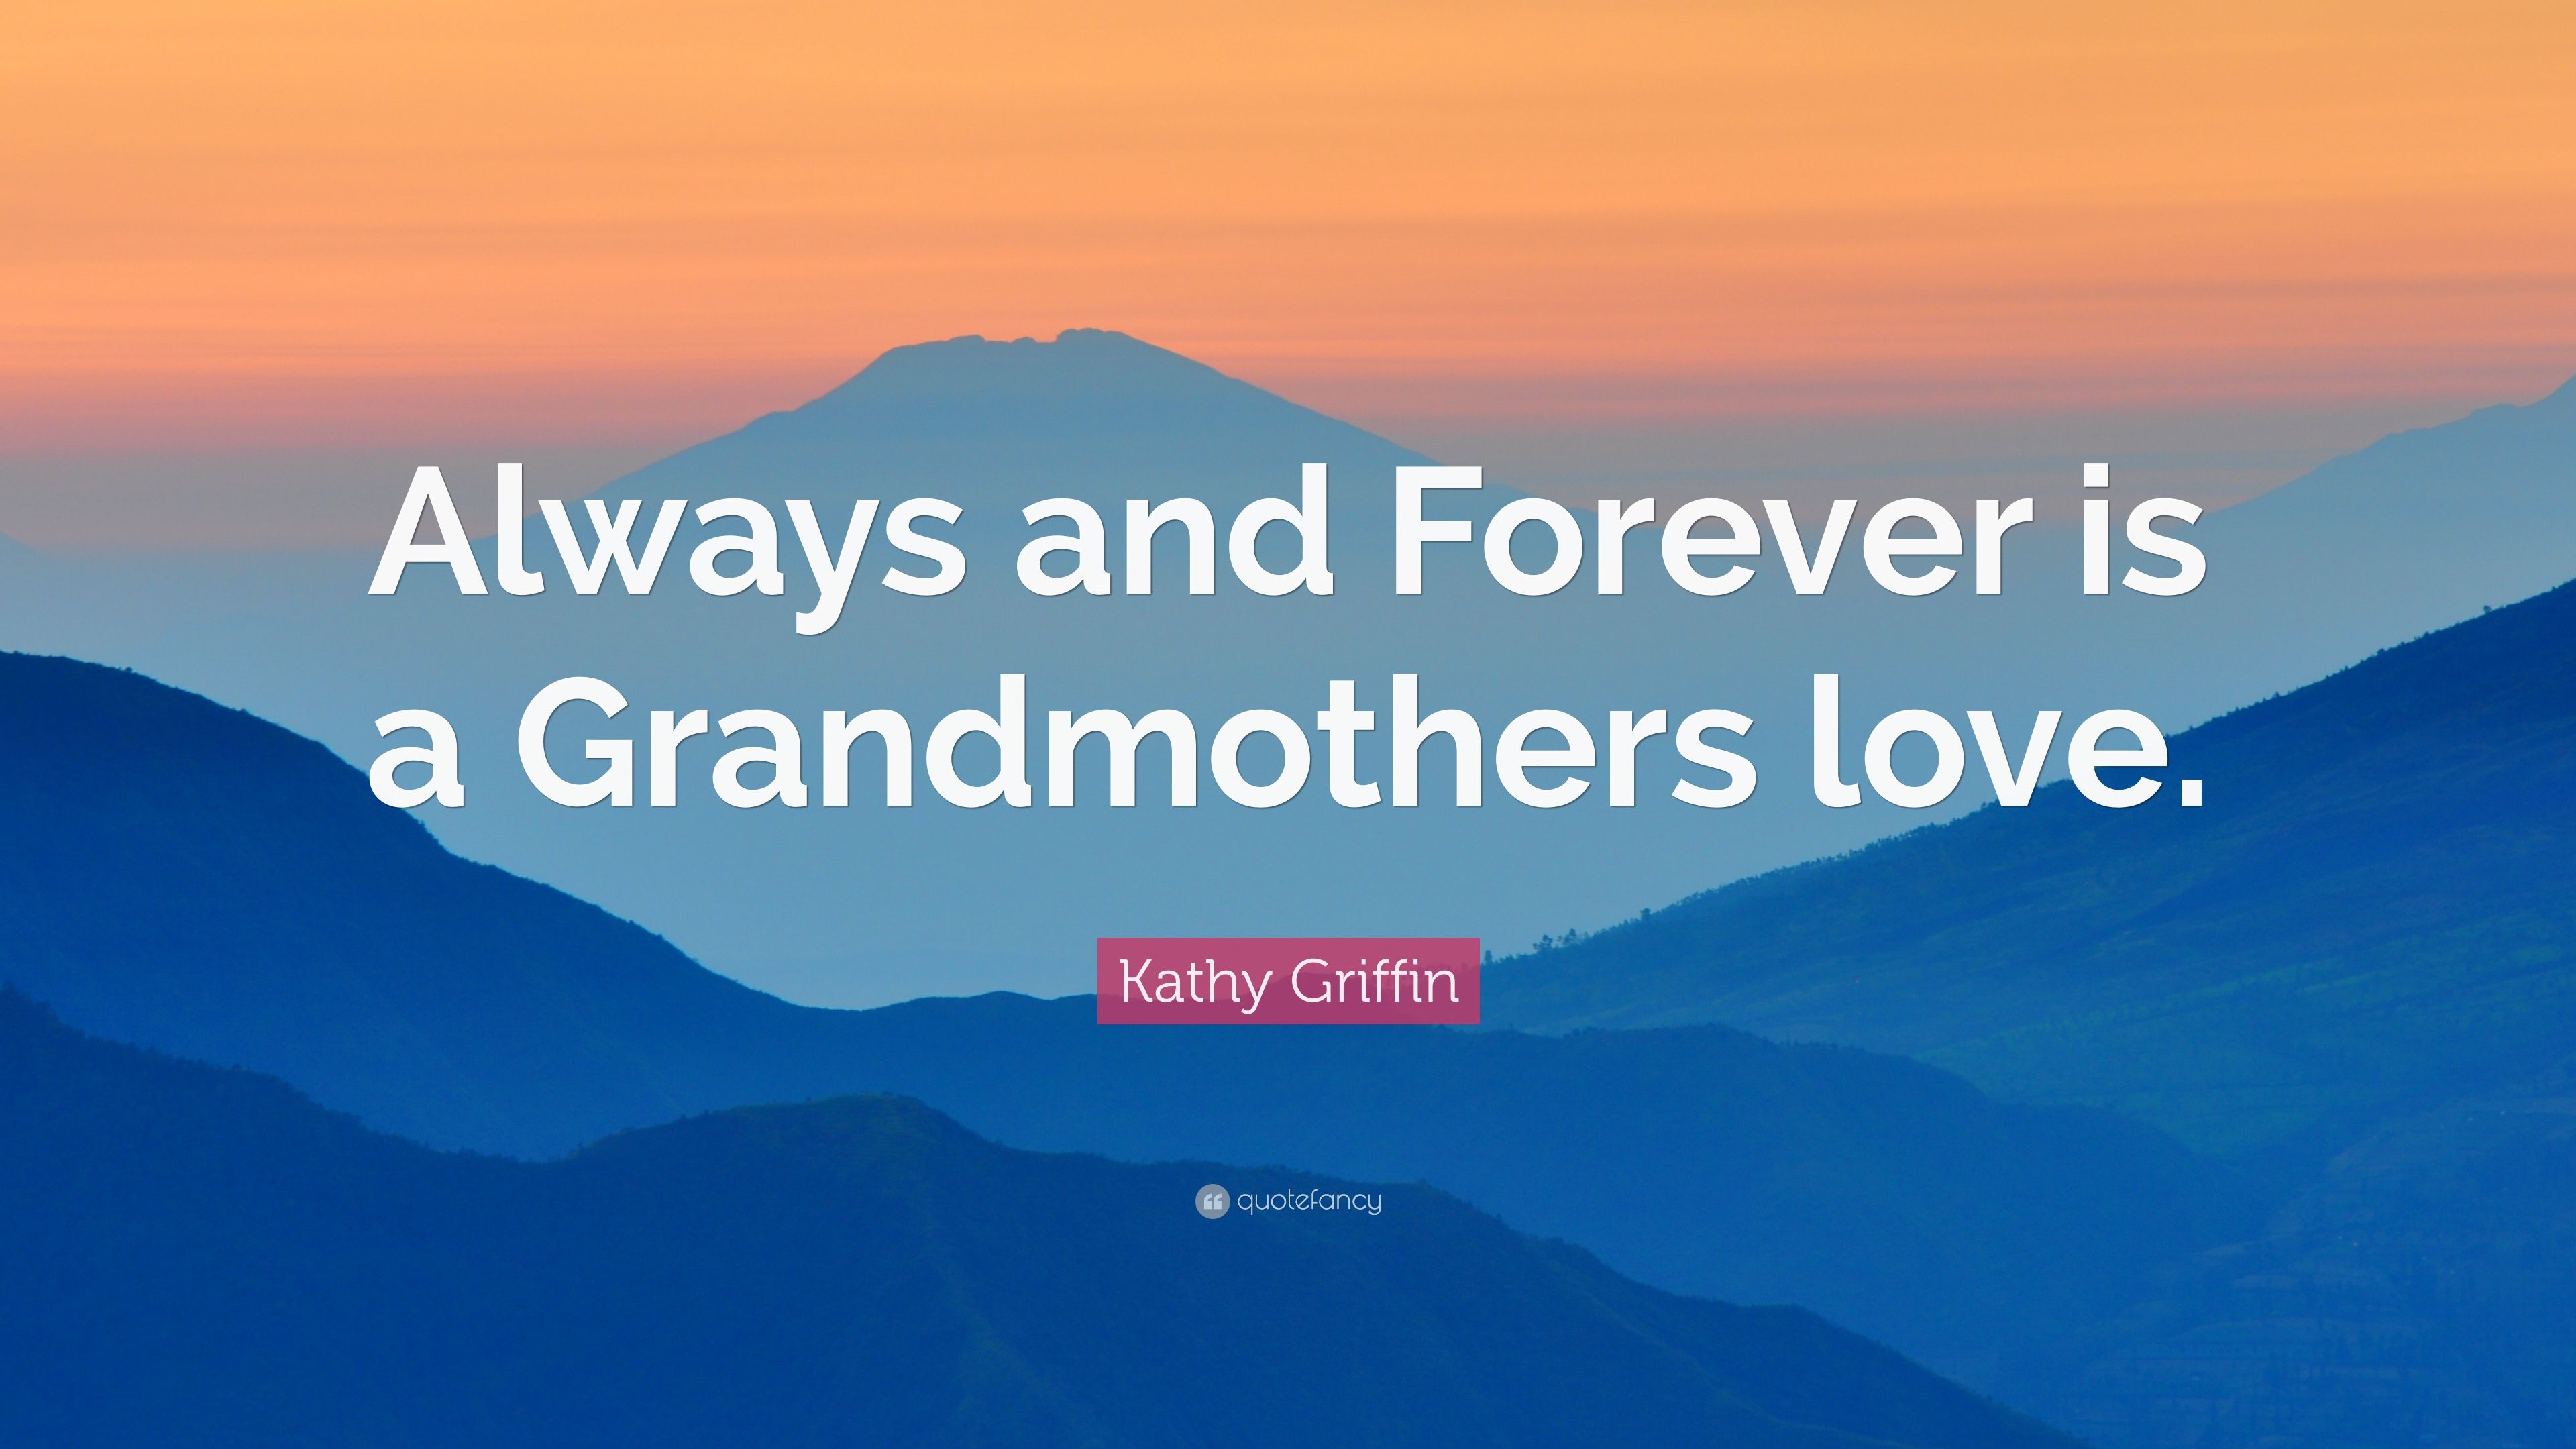 Kathy Griffin Quote: “Always and Forever is a Grandmothers love